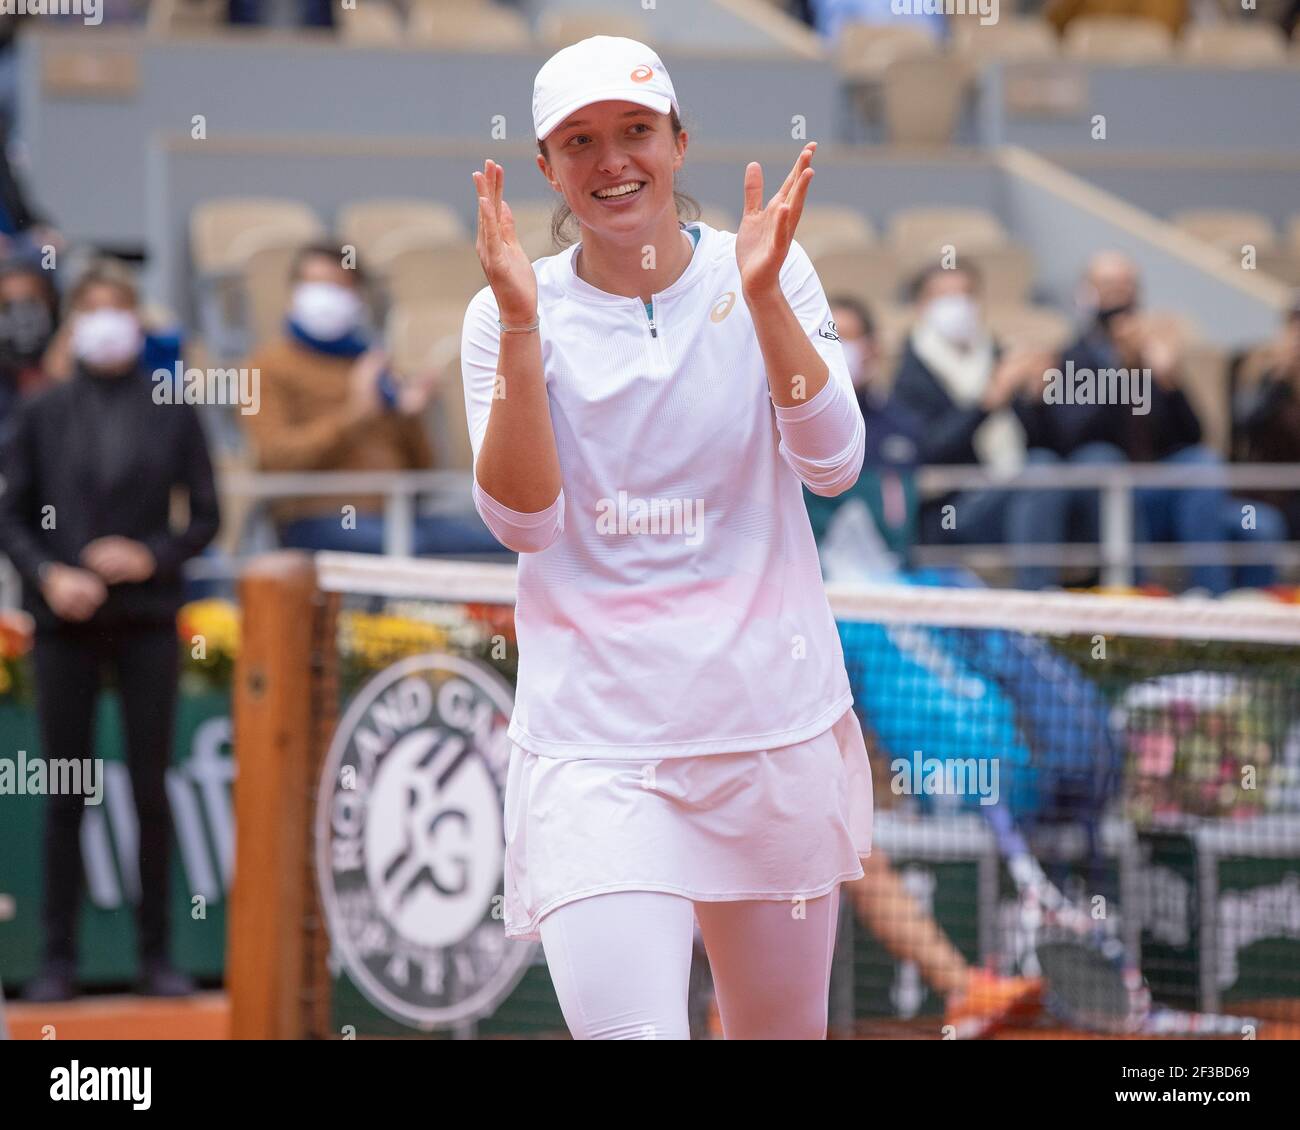 Polish tennis player Iga Swiatek celebrating her victory at the French